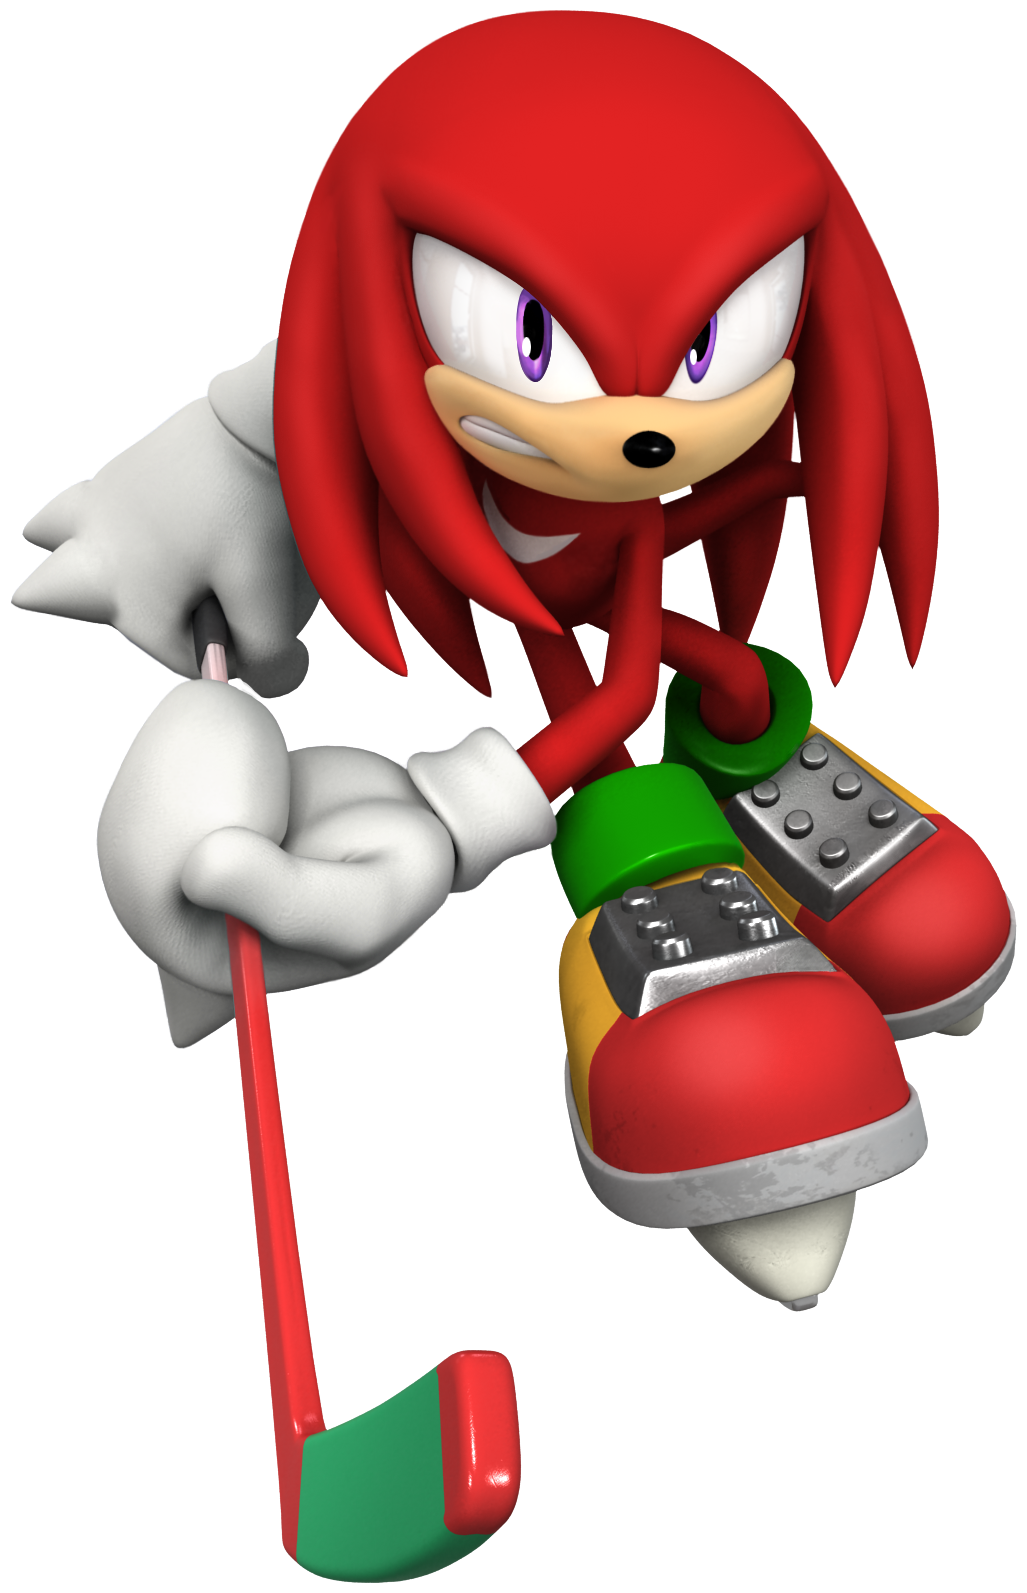 Wintergames_knuckles.png